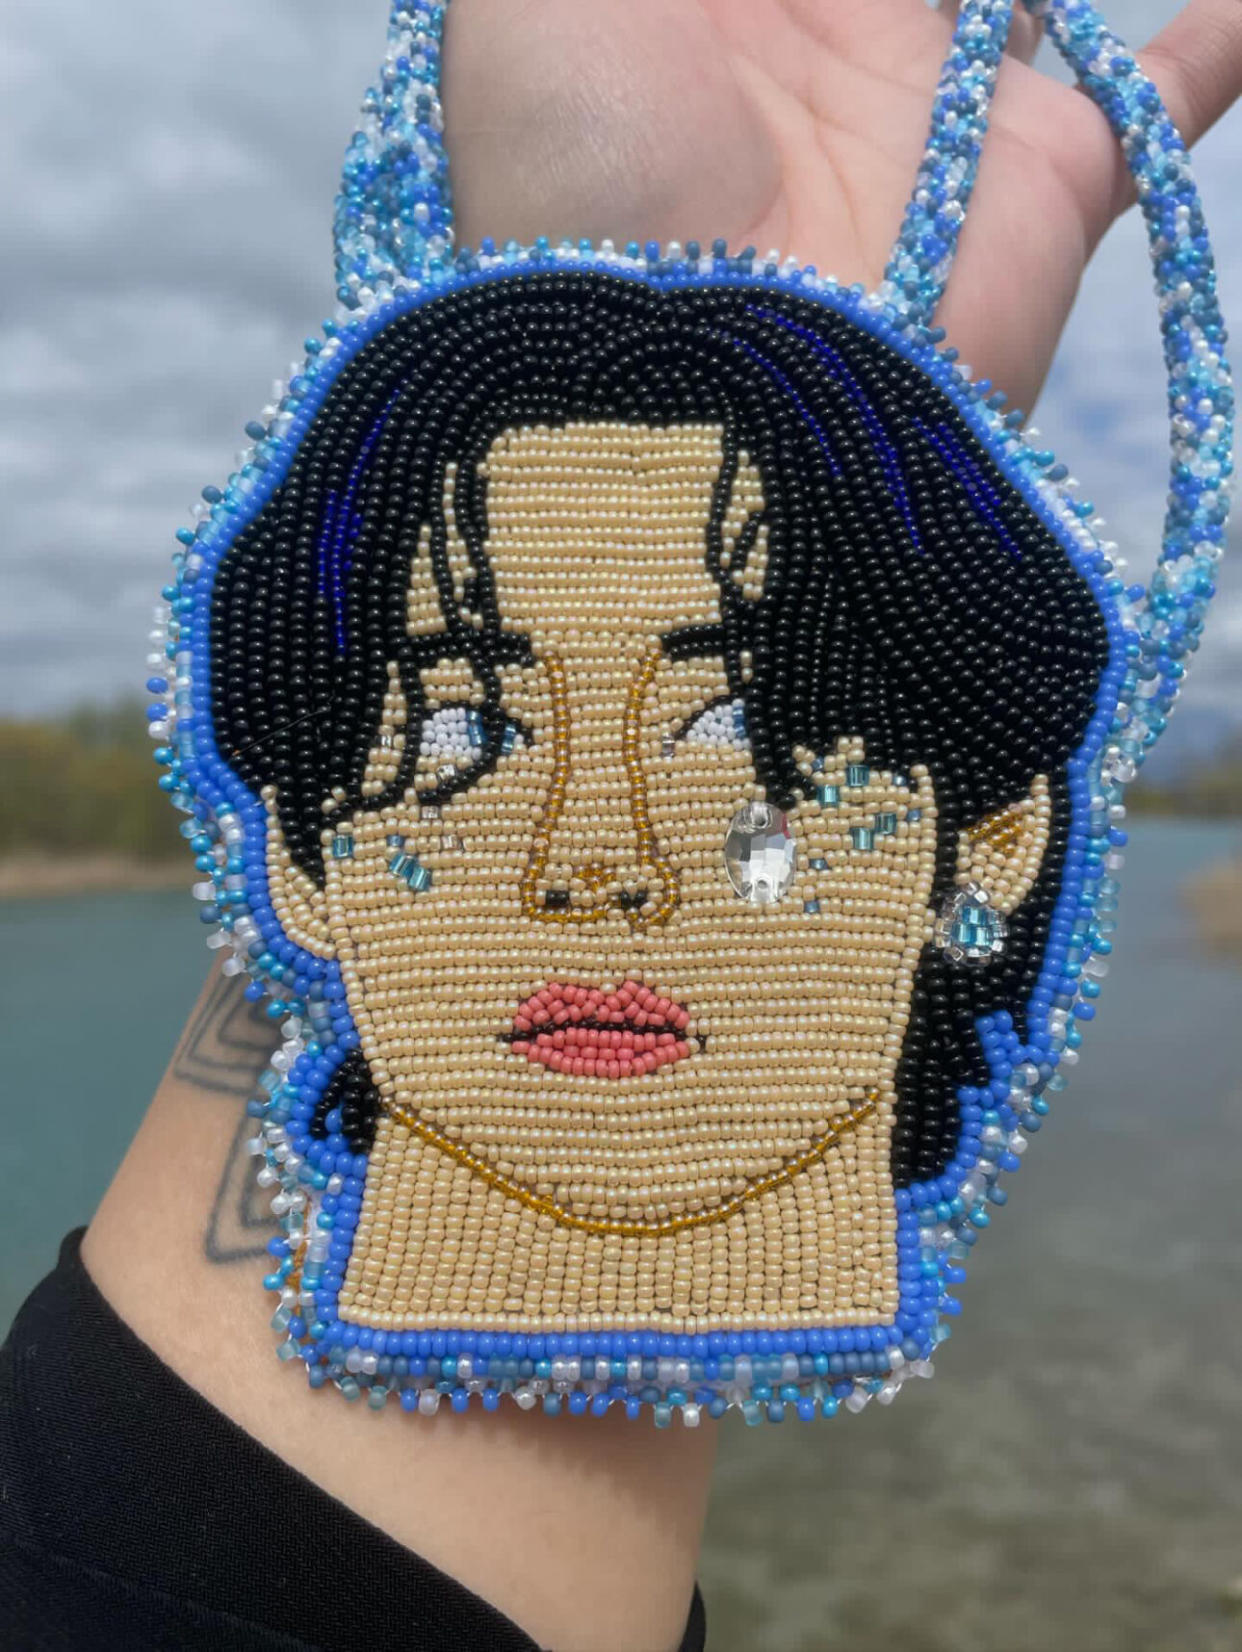 Stevi Riley showcases her K-pop beadwork. (Credit: Courtesy of Stevi Riley’s private collection.)